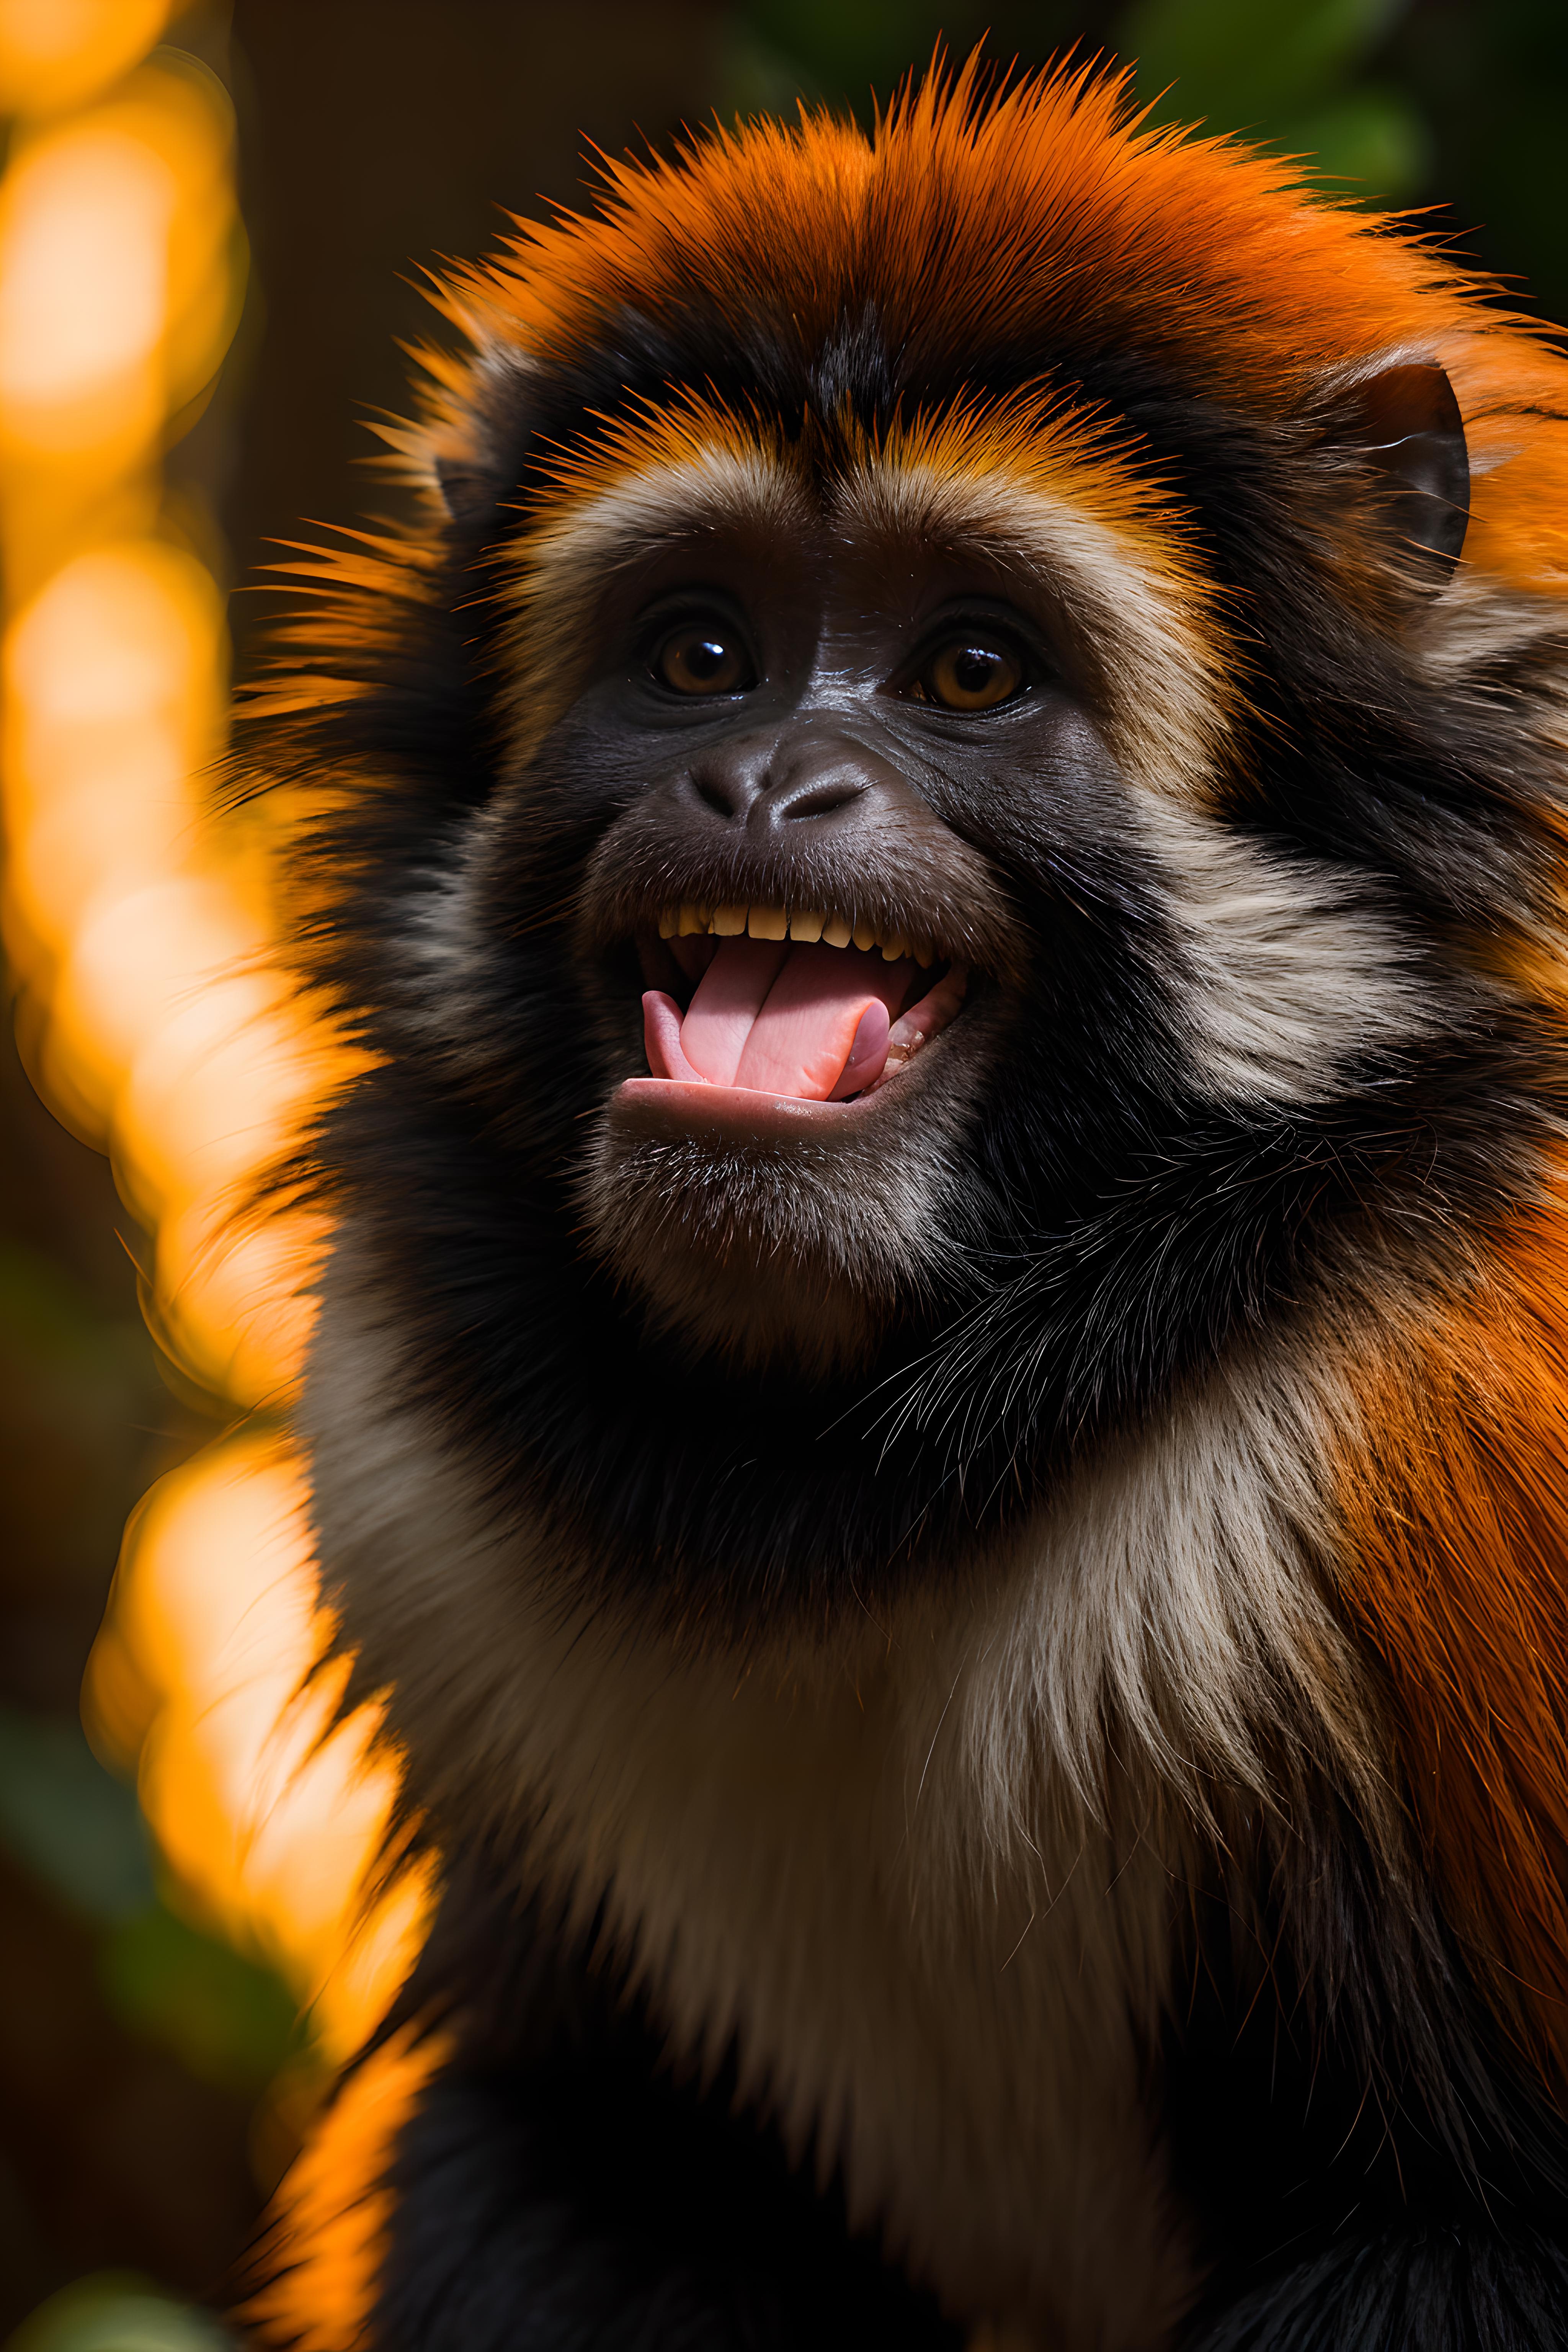 A smiling monkey with a black and white face and orange fur.